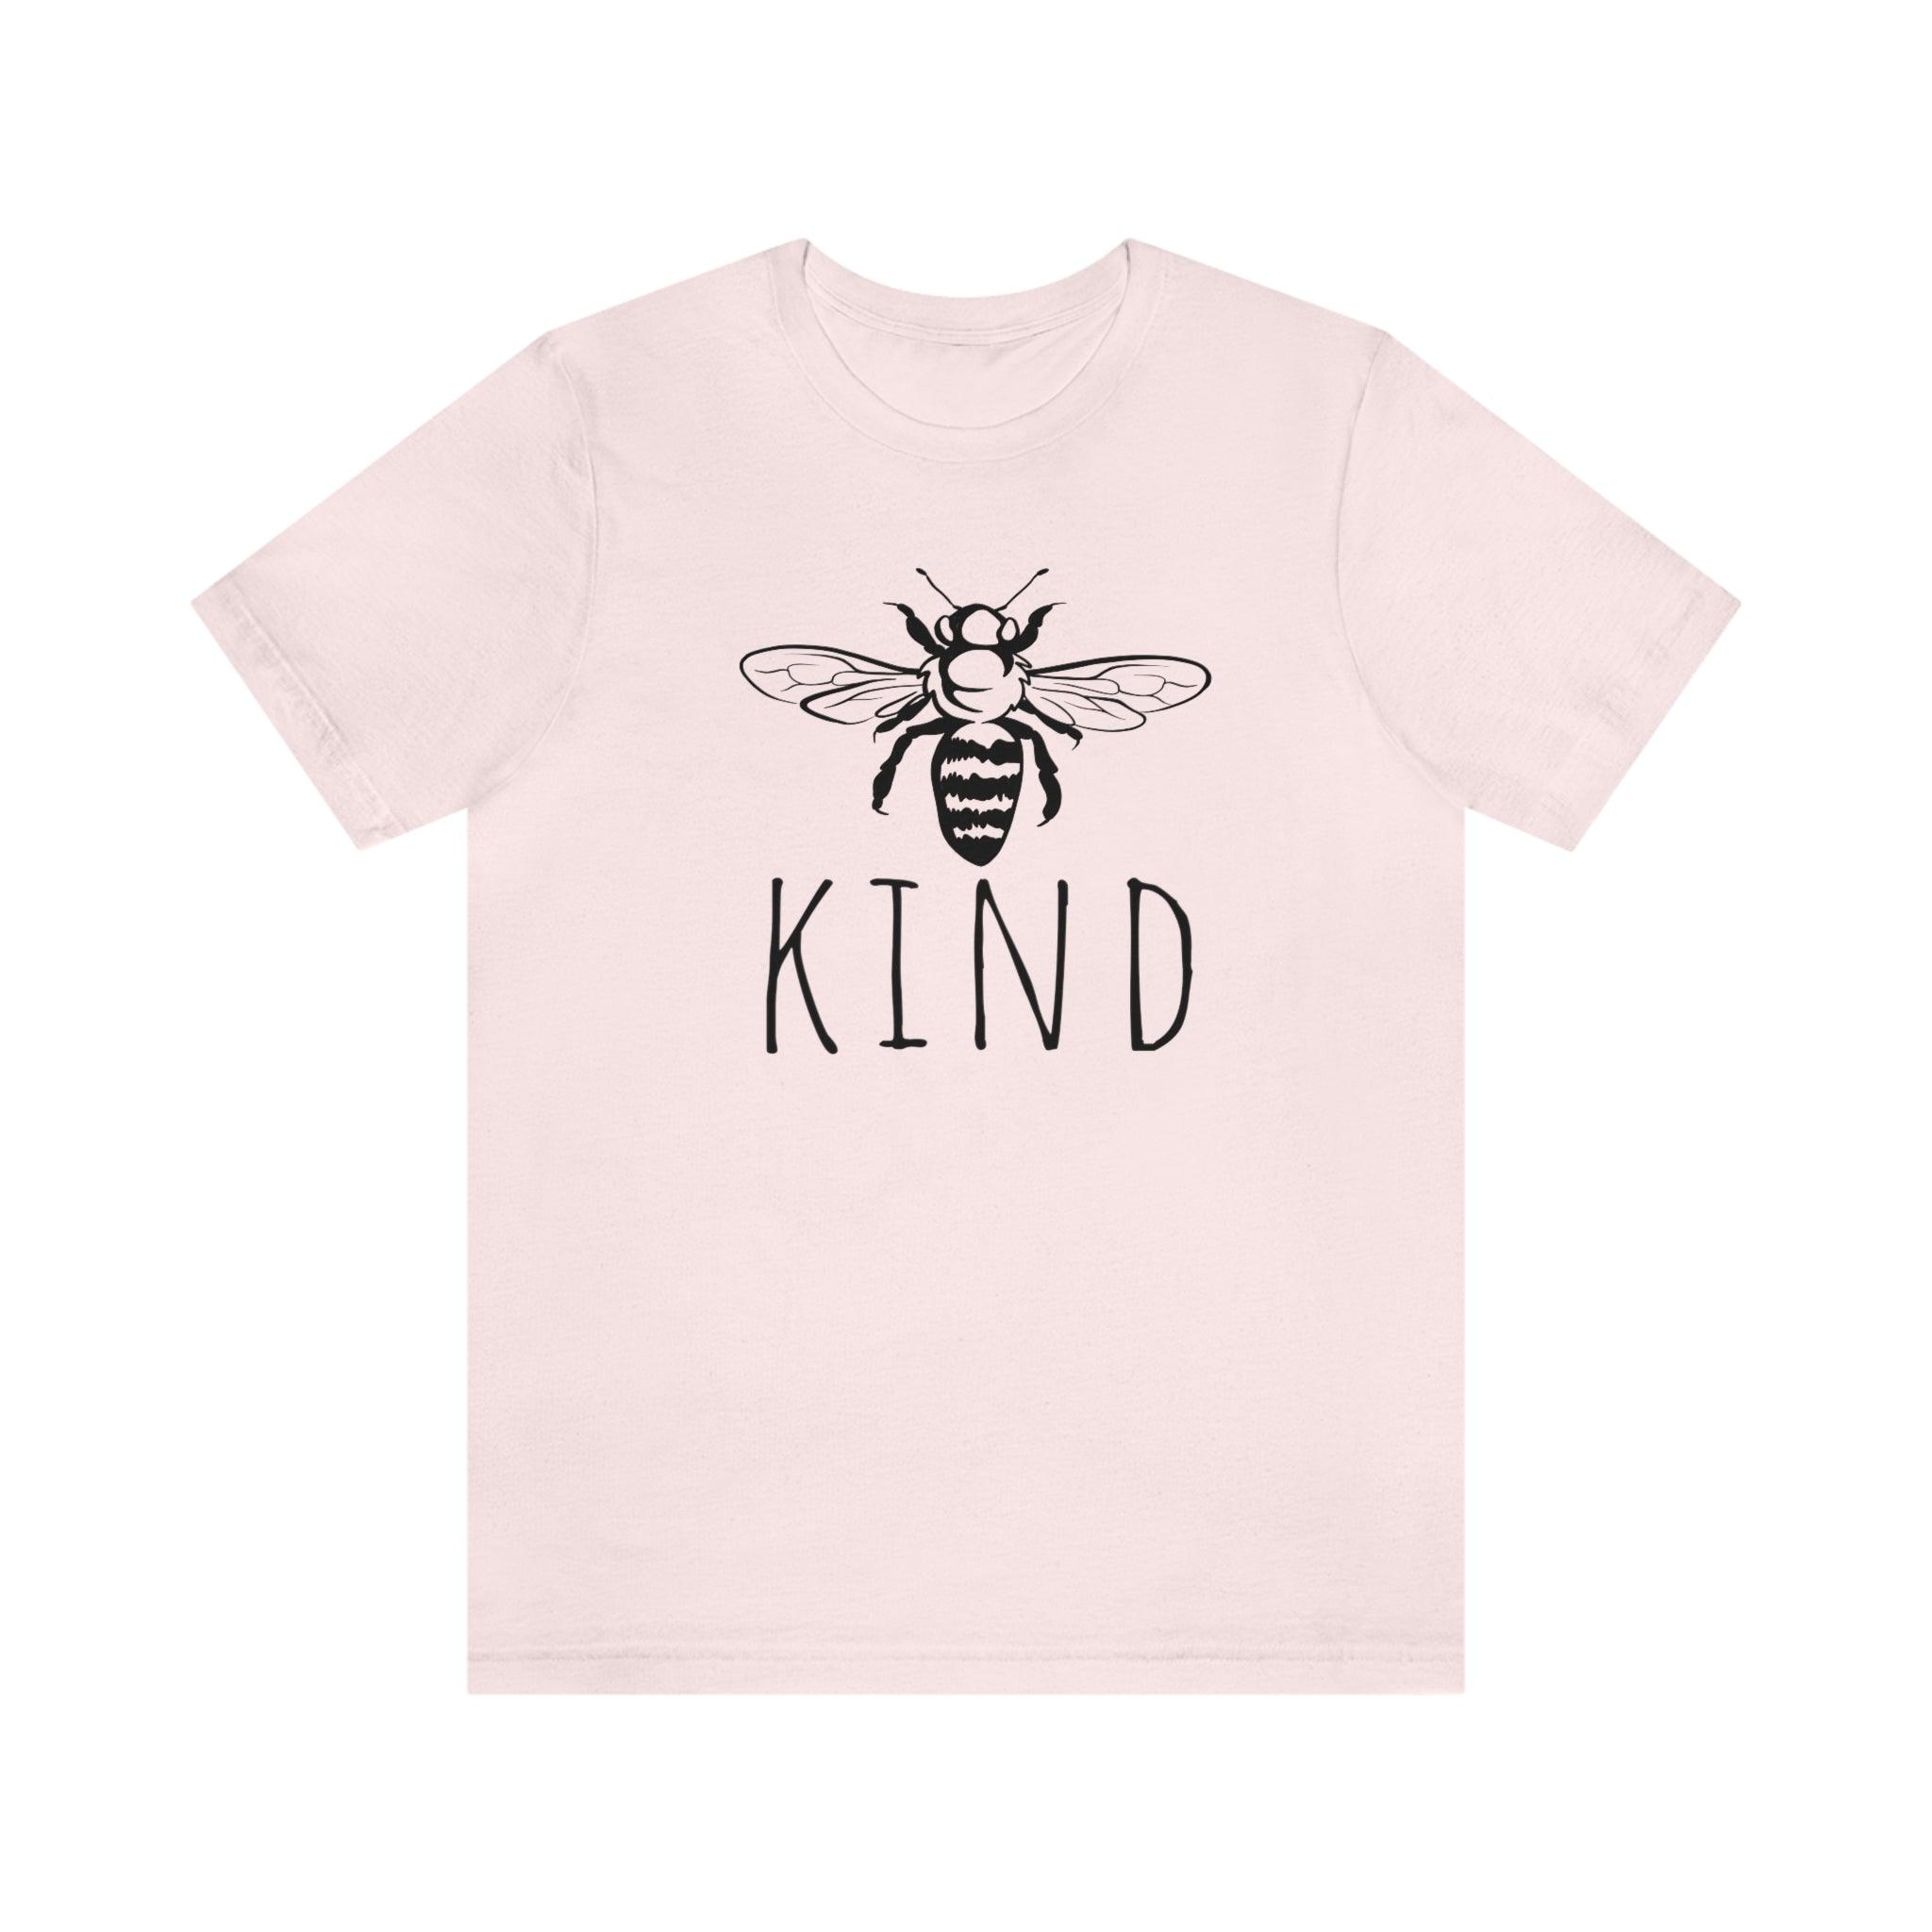 "Bee Kind" 100% Cotton Jersey Short Sleeve T-Shirt - Melomys